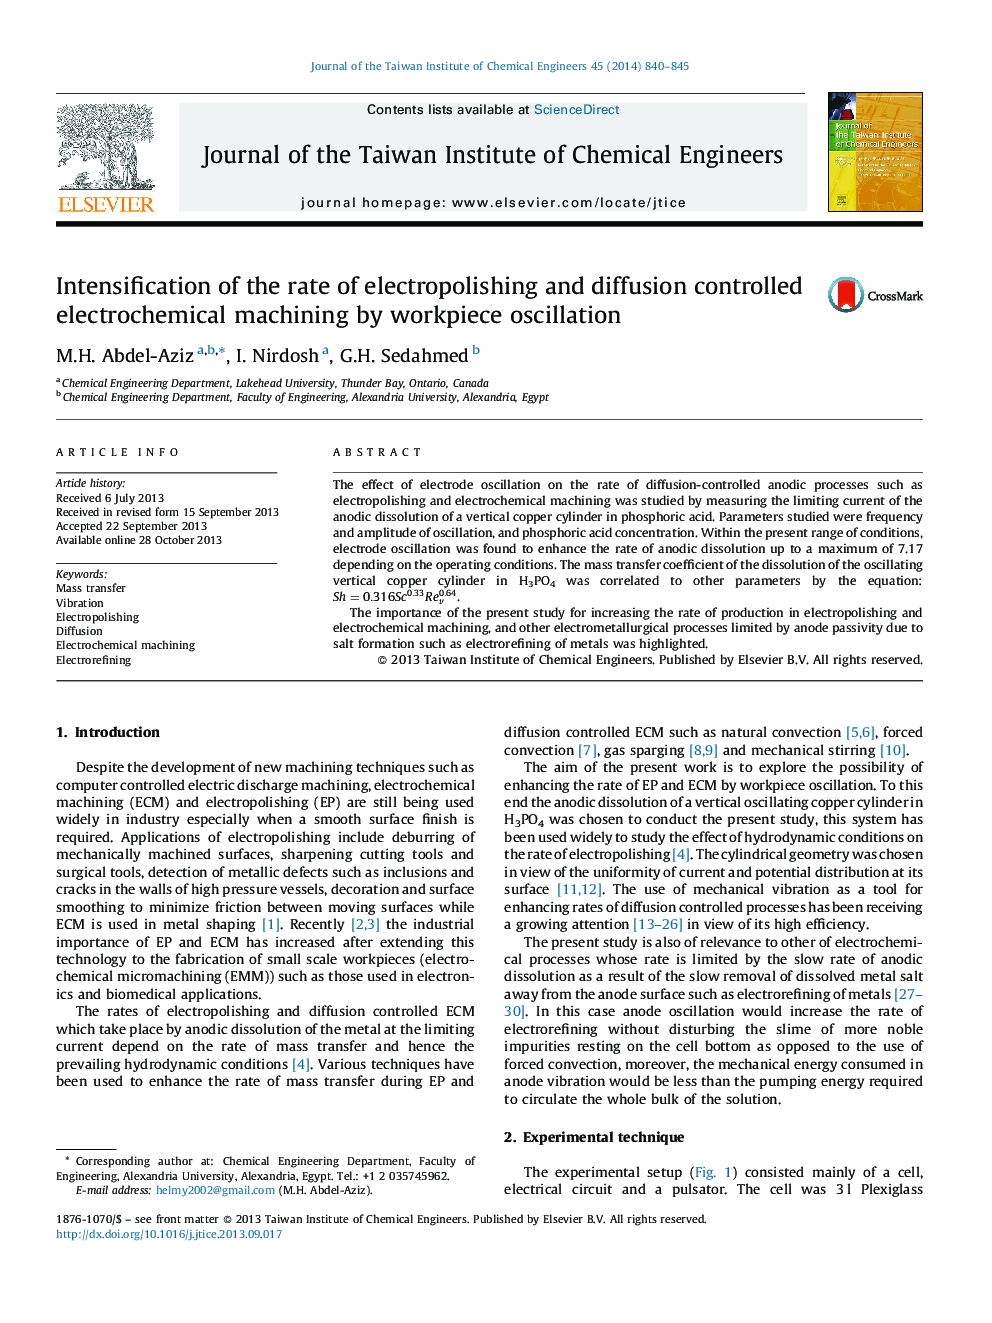 Intensification of the rate of electropolishing and diffusion controlled electrochemical machining by workpiece oscillation